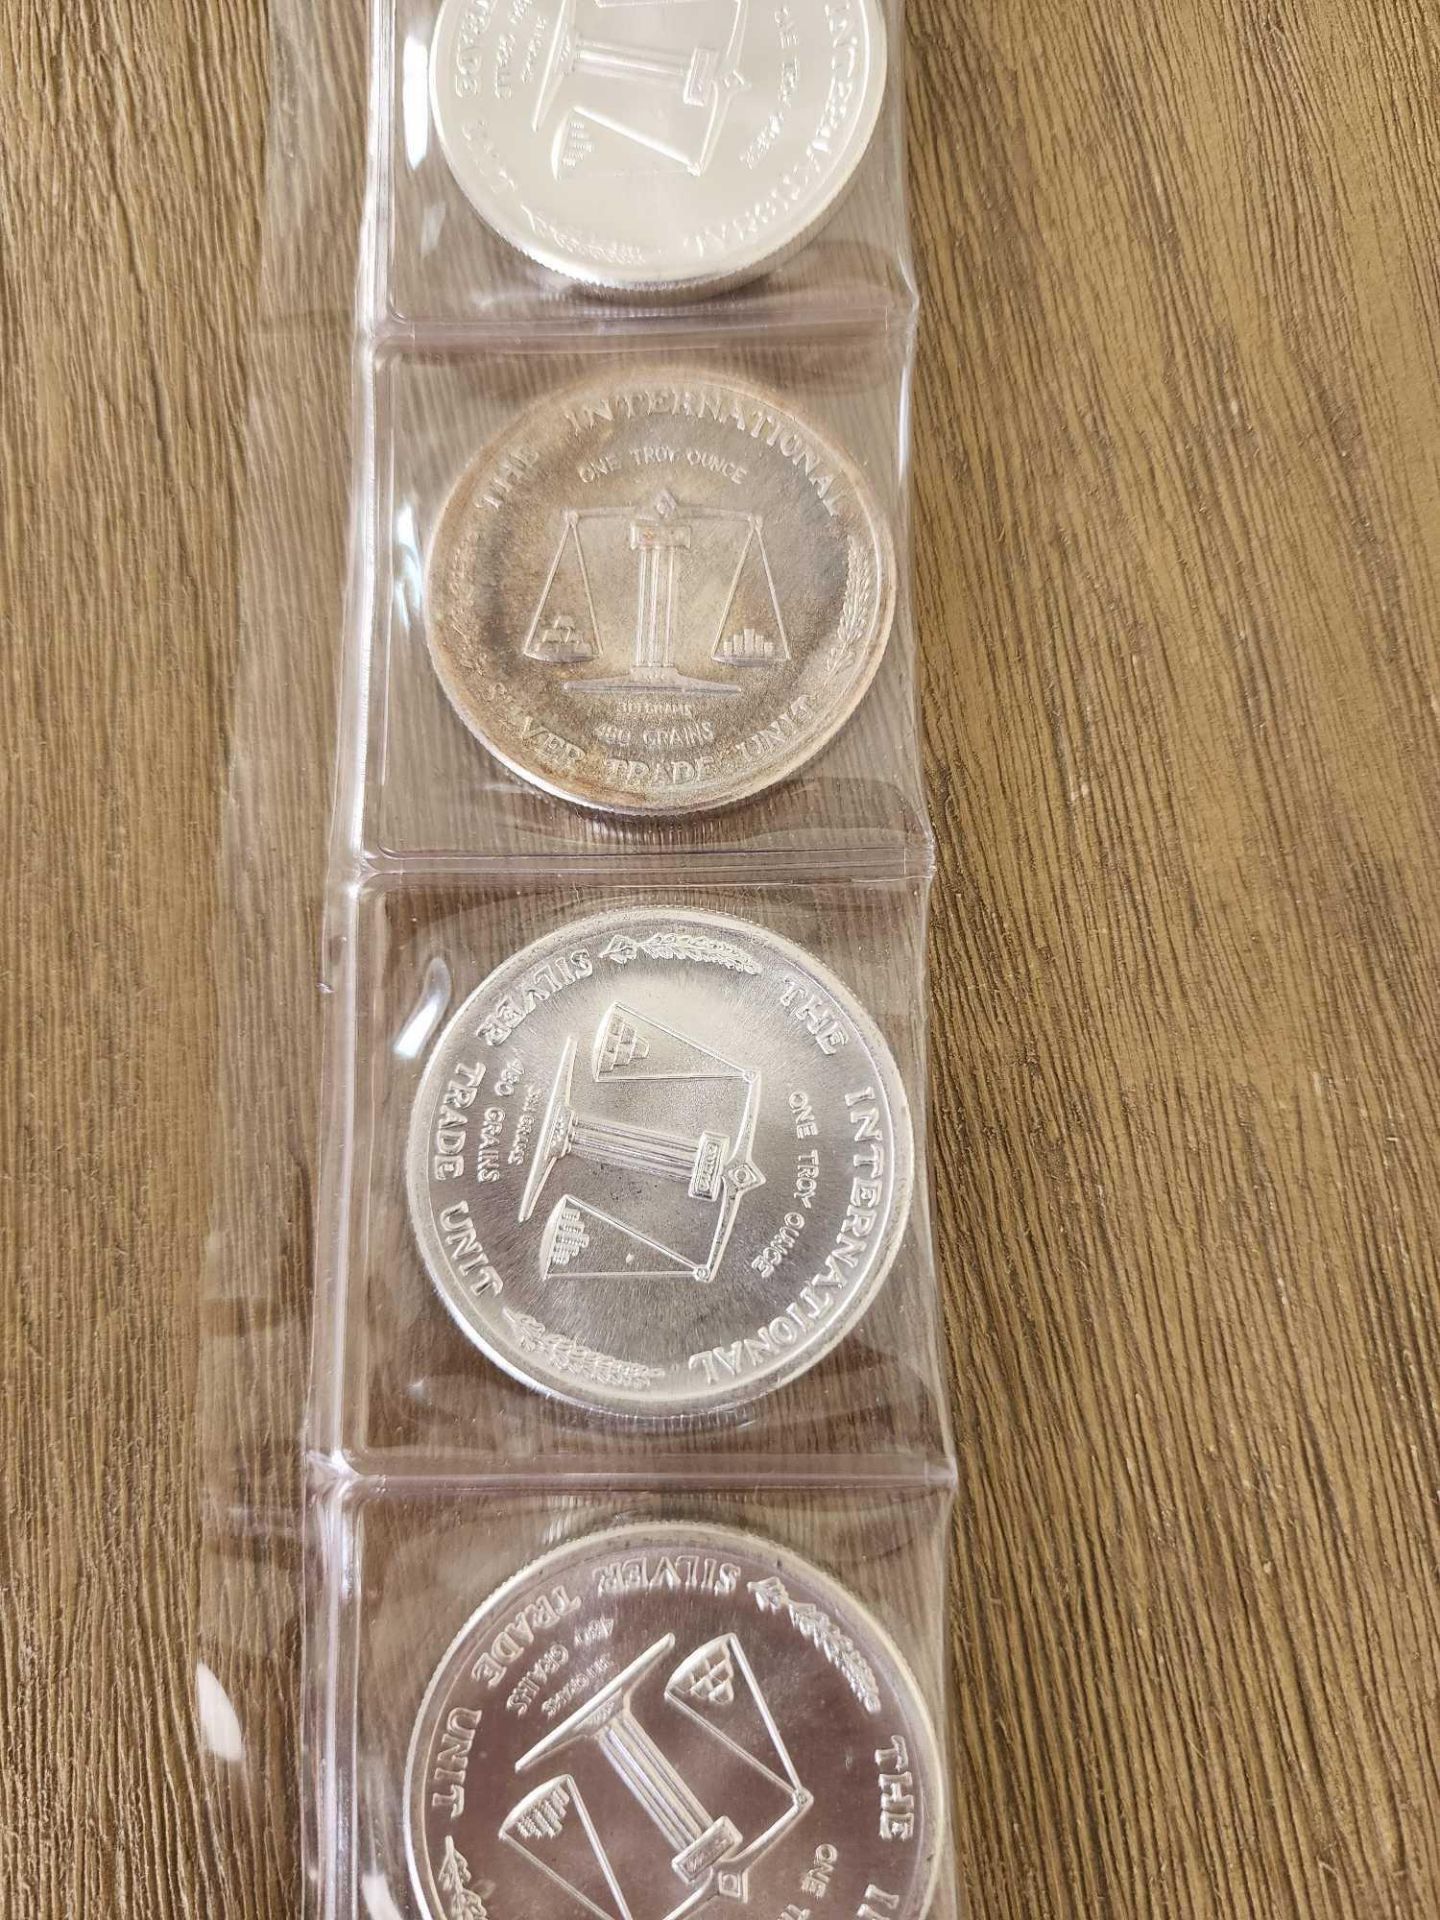 5 World Trade International Silver Vintage Silver Coins 1 oz Coins - Image 3 of 6